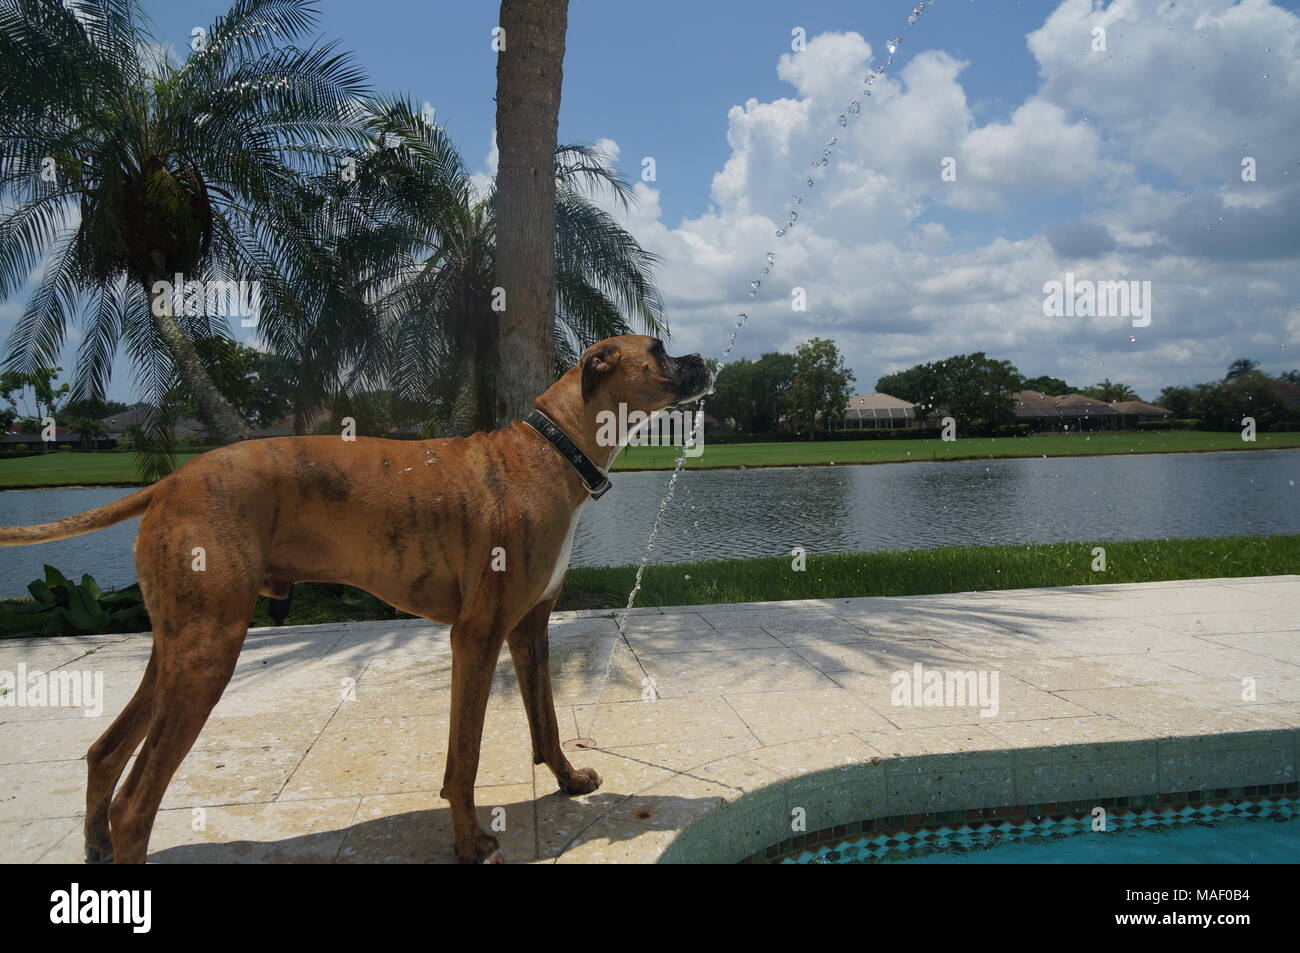 Dog drinks water on a hot day - Florida Stock Photo